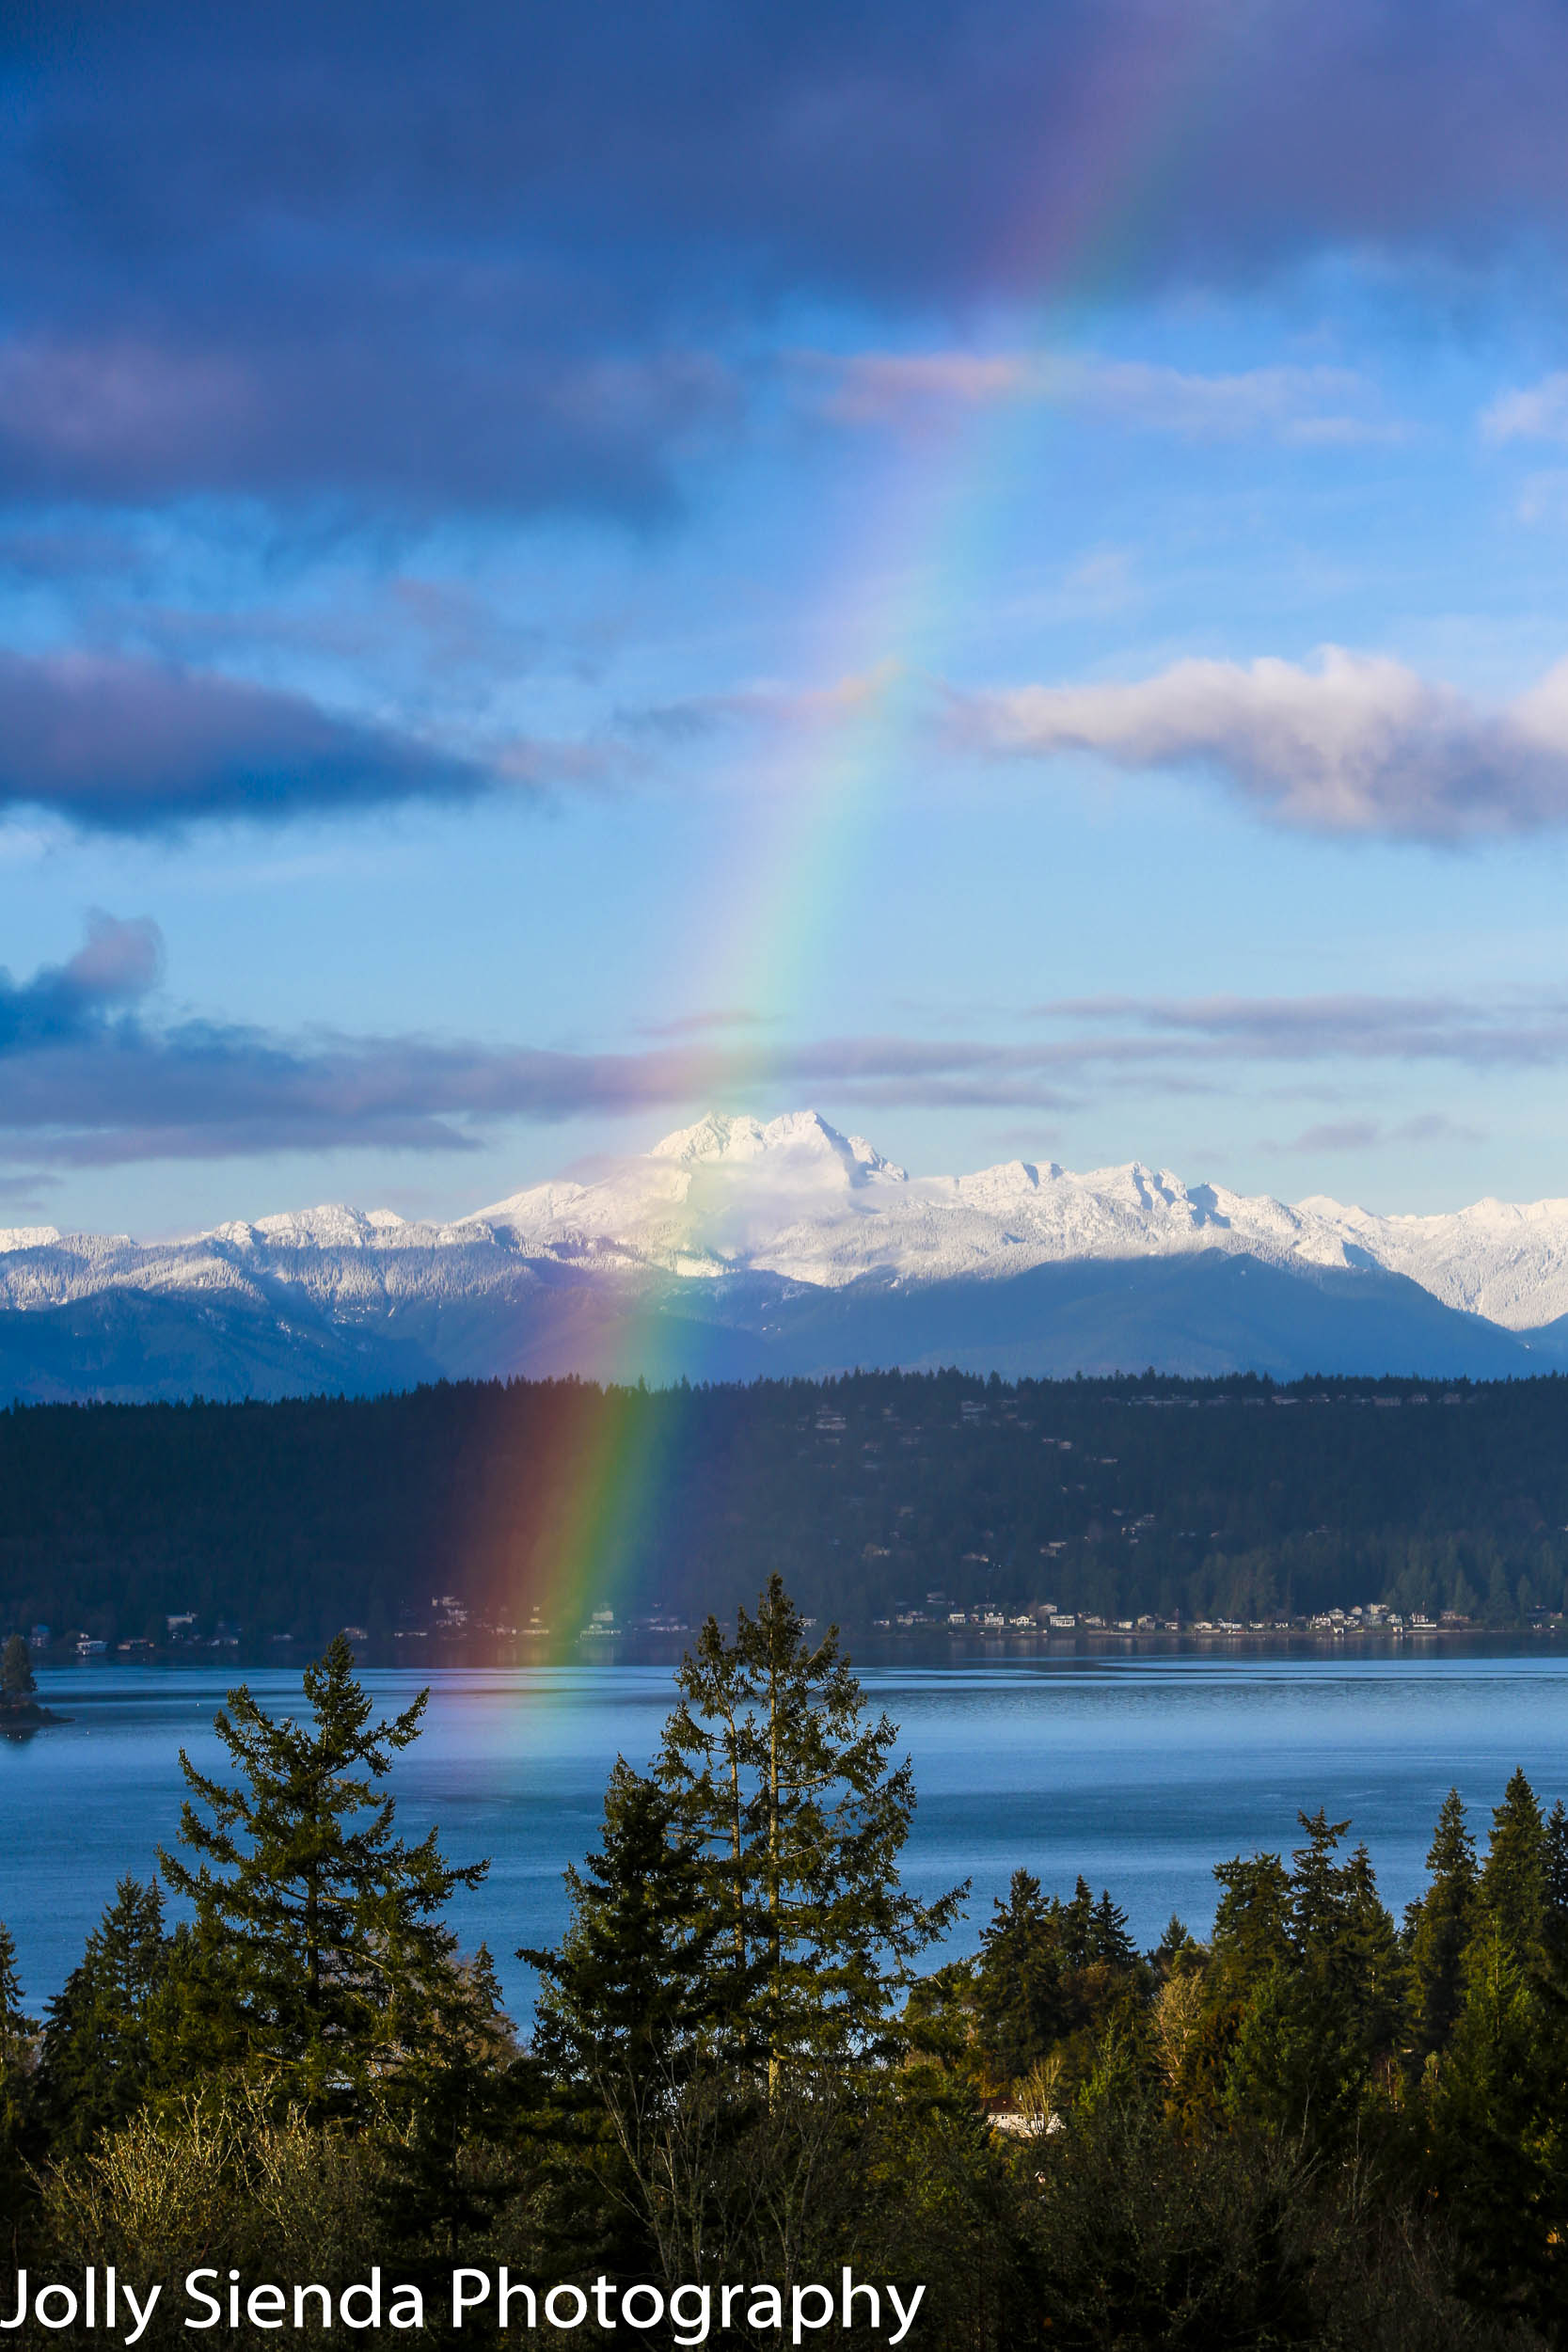 Rainbow over The Brothers Mountain and Dyes Inlet